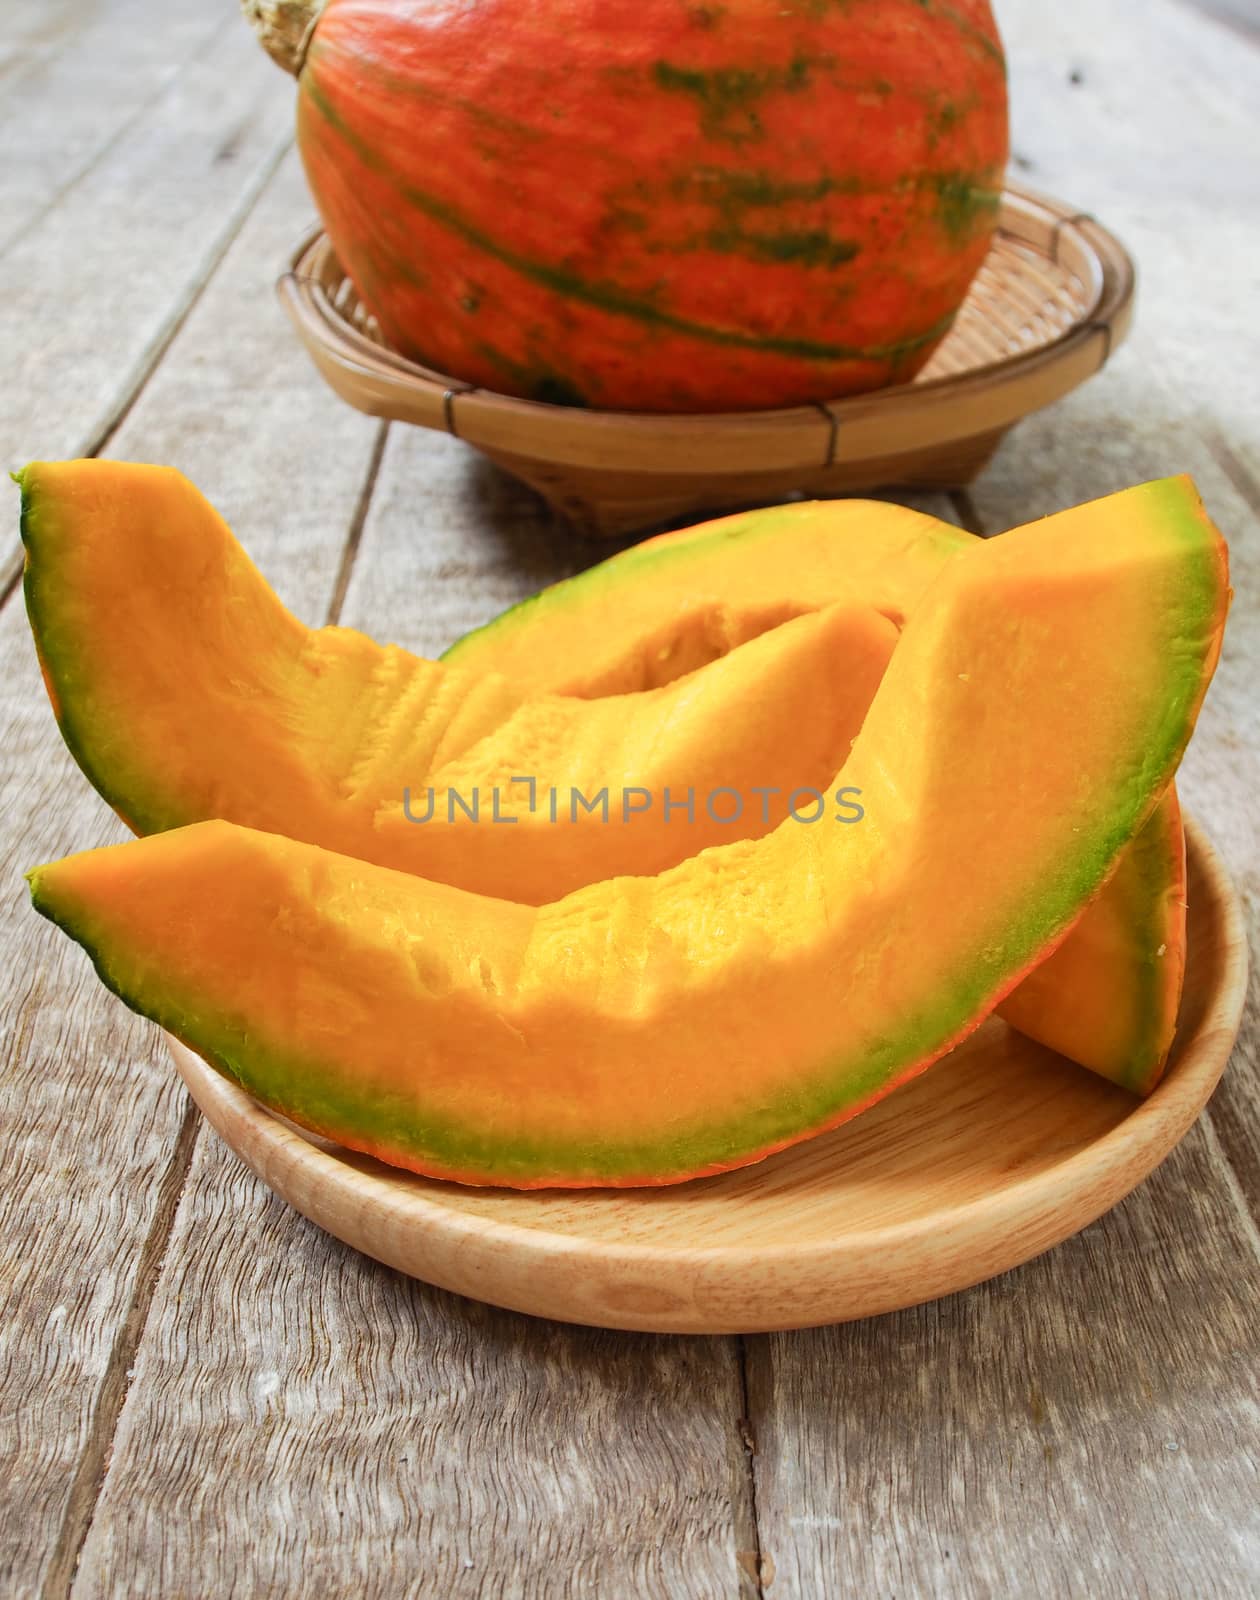 Place the pumpkin on a plate on a wooden table.